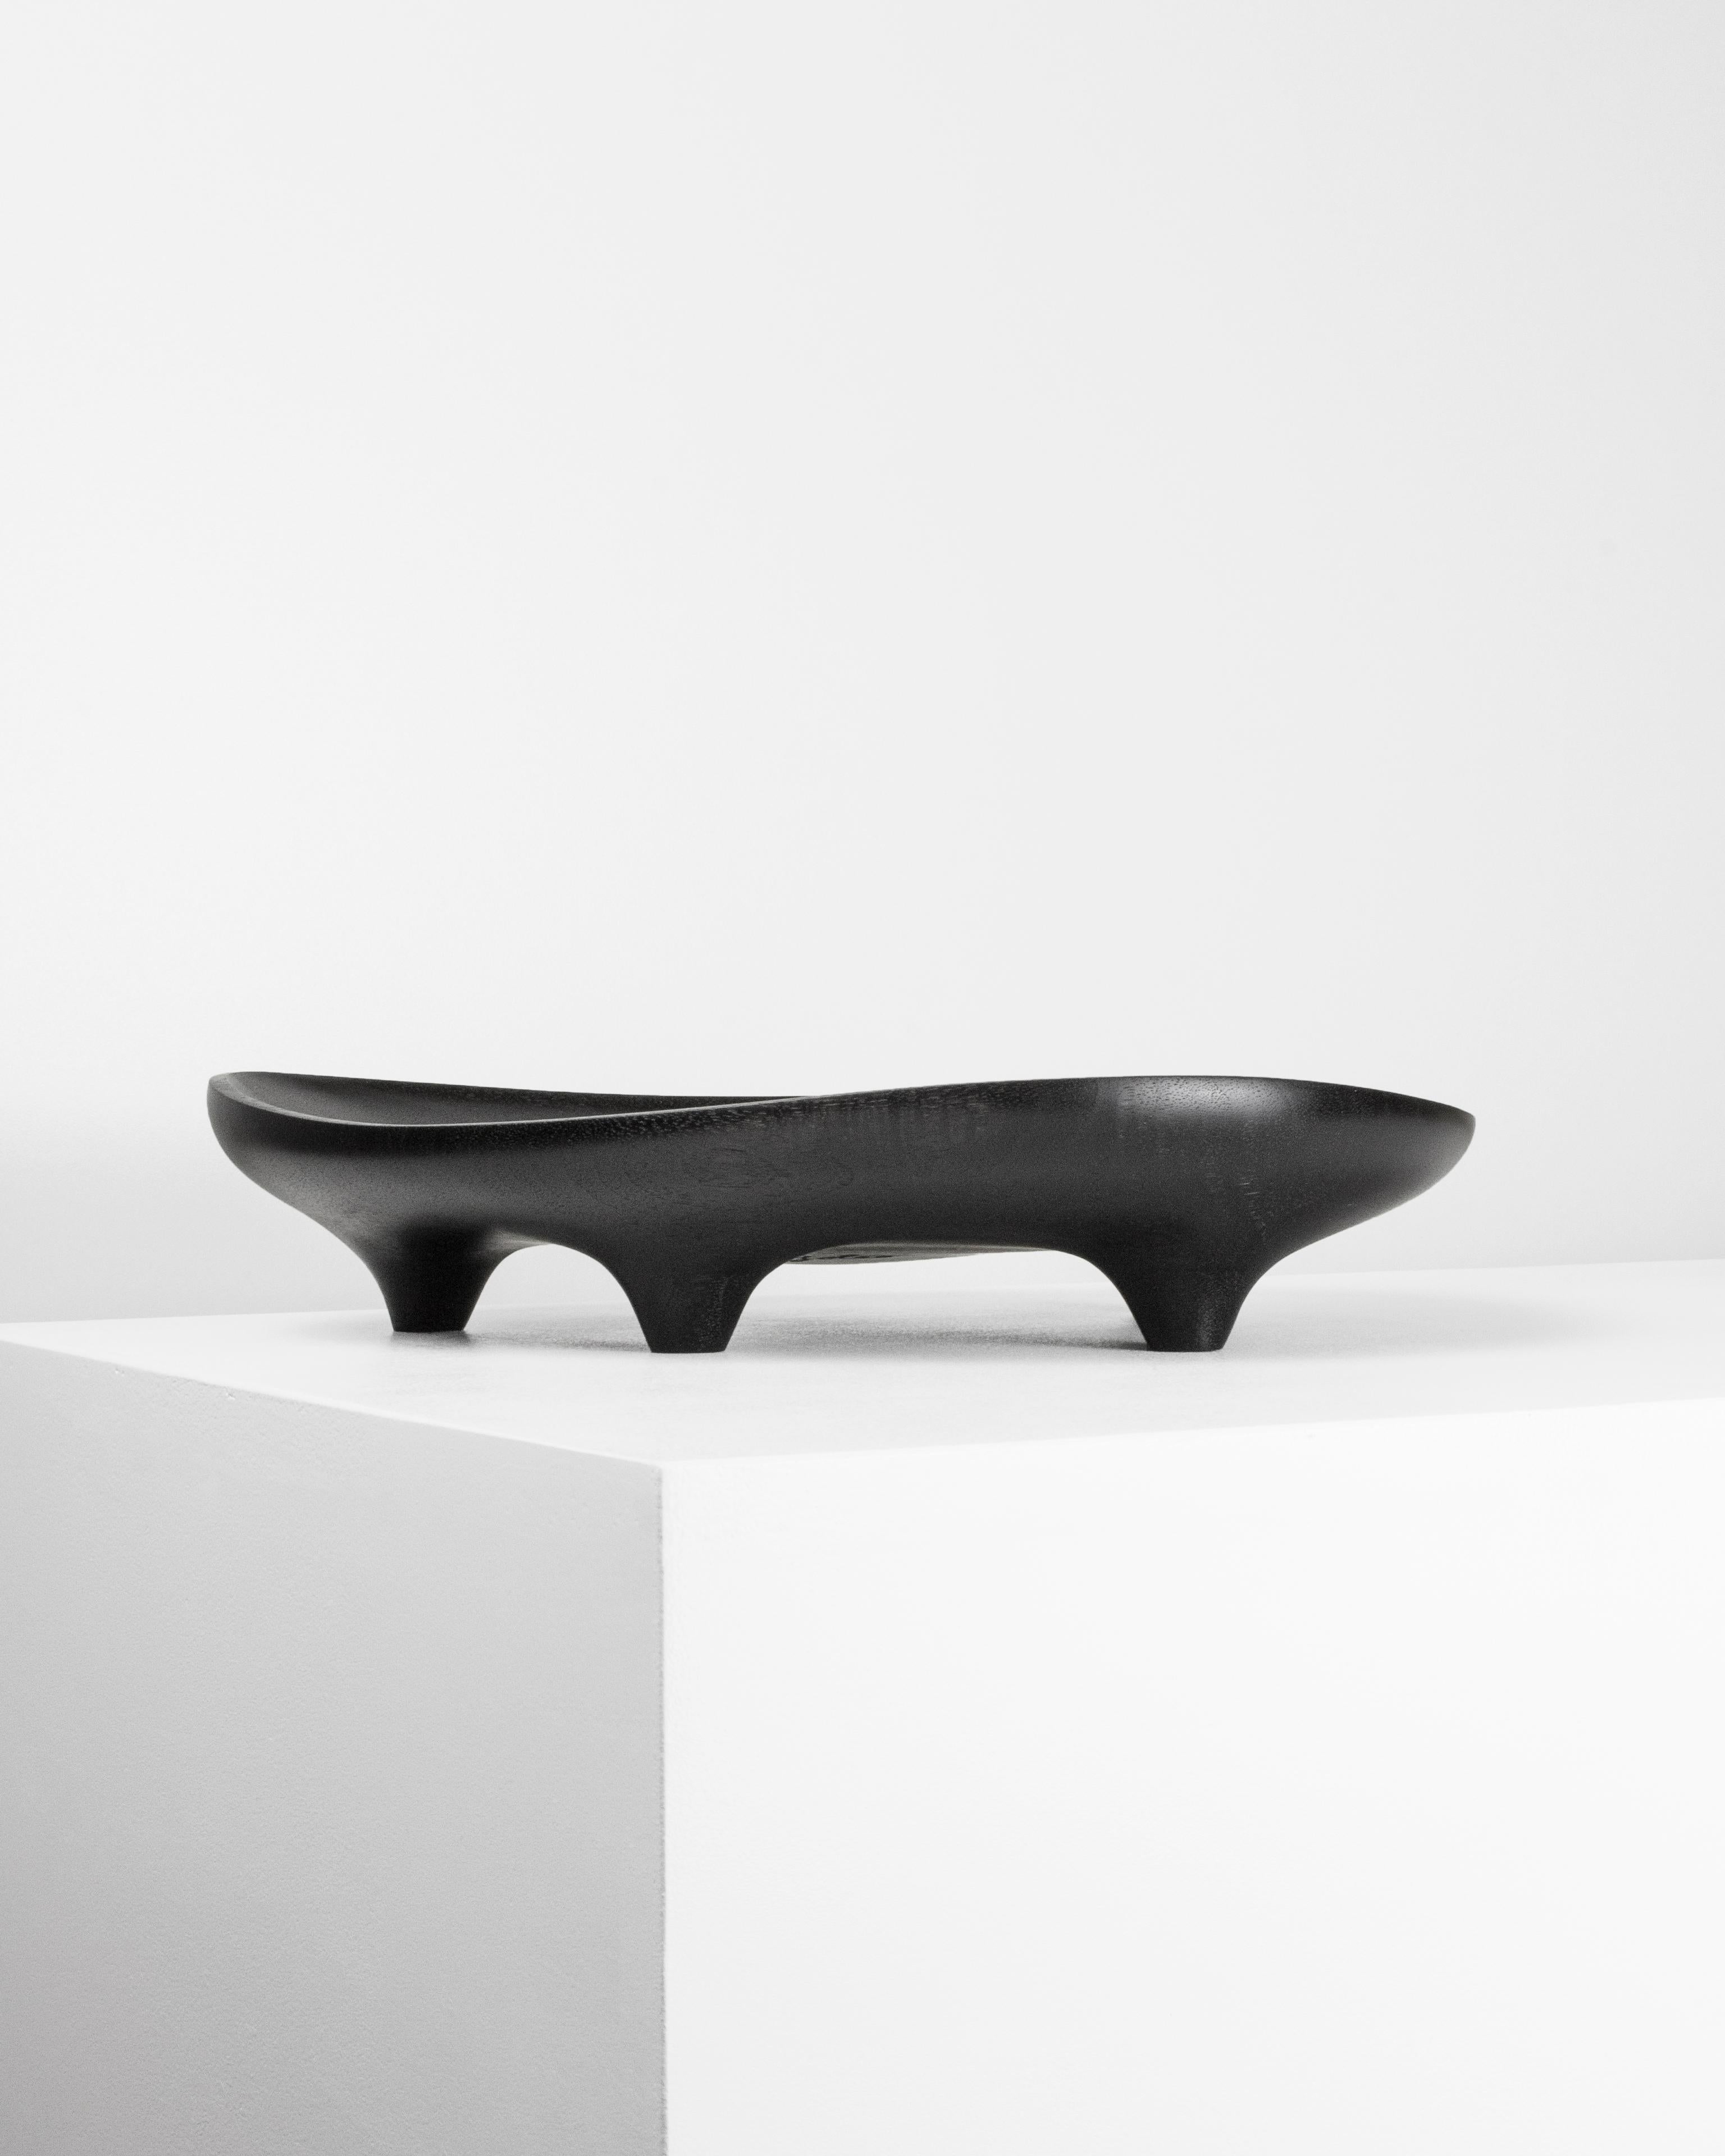 Table Tray by Maxime Goléo
Unique piece.
Dimensions: W 33 x D 28 x H 7 cm.
Materials: Solid walnut.
Finish: Ebonized and oil.

It's a carved and ebonized walnut table tray.
Each piece is unique, handmade, signed and dated.
Other dimensions and types